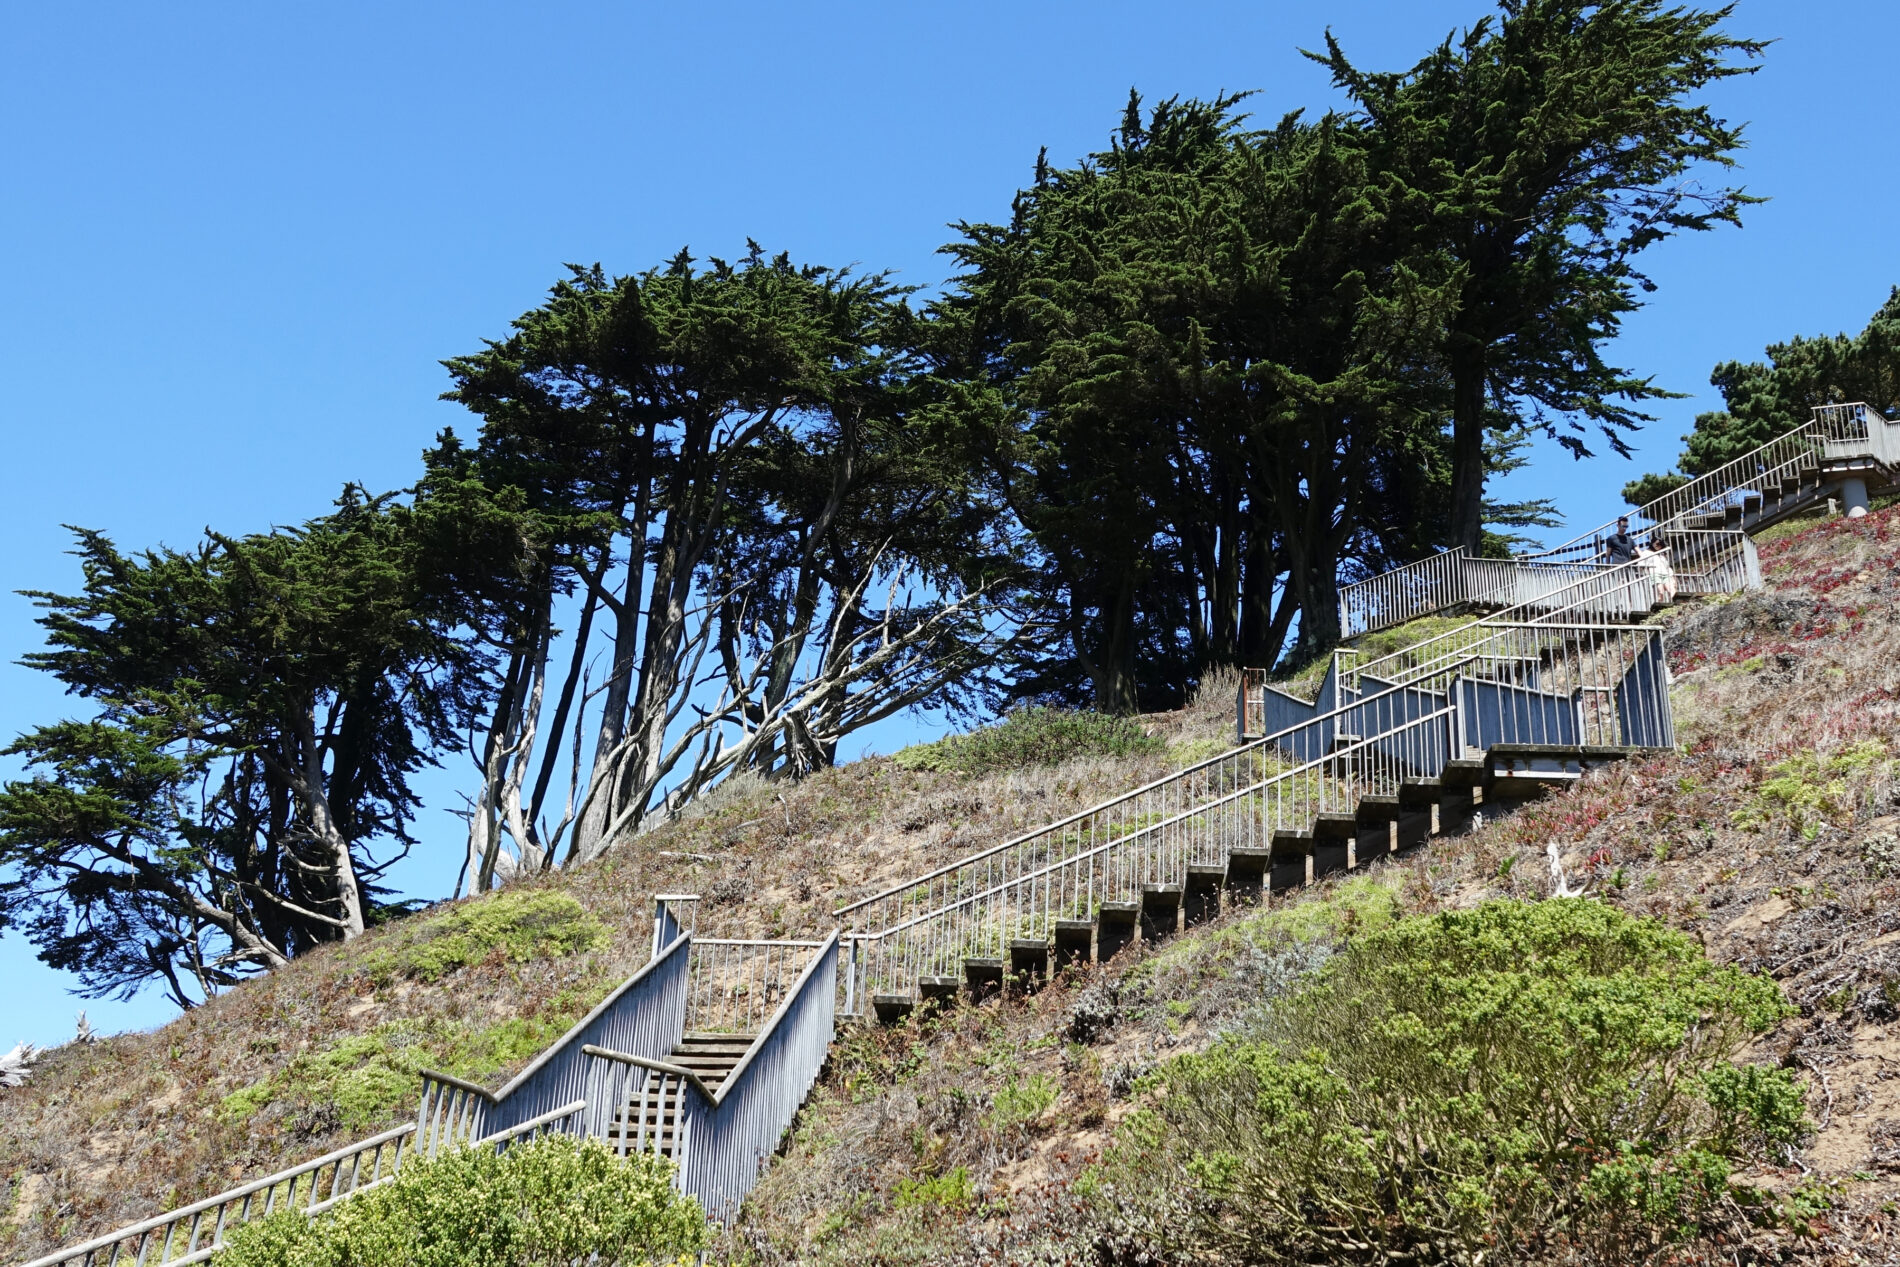 Wooden stairs zigzagging up Turtle Hill to Grandview Park in San Francisco.